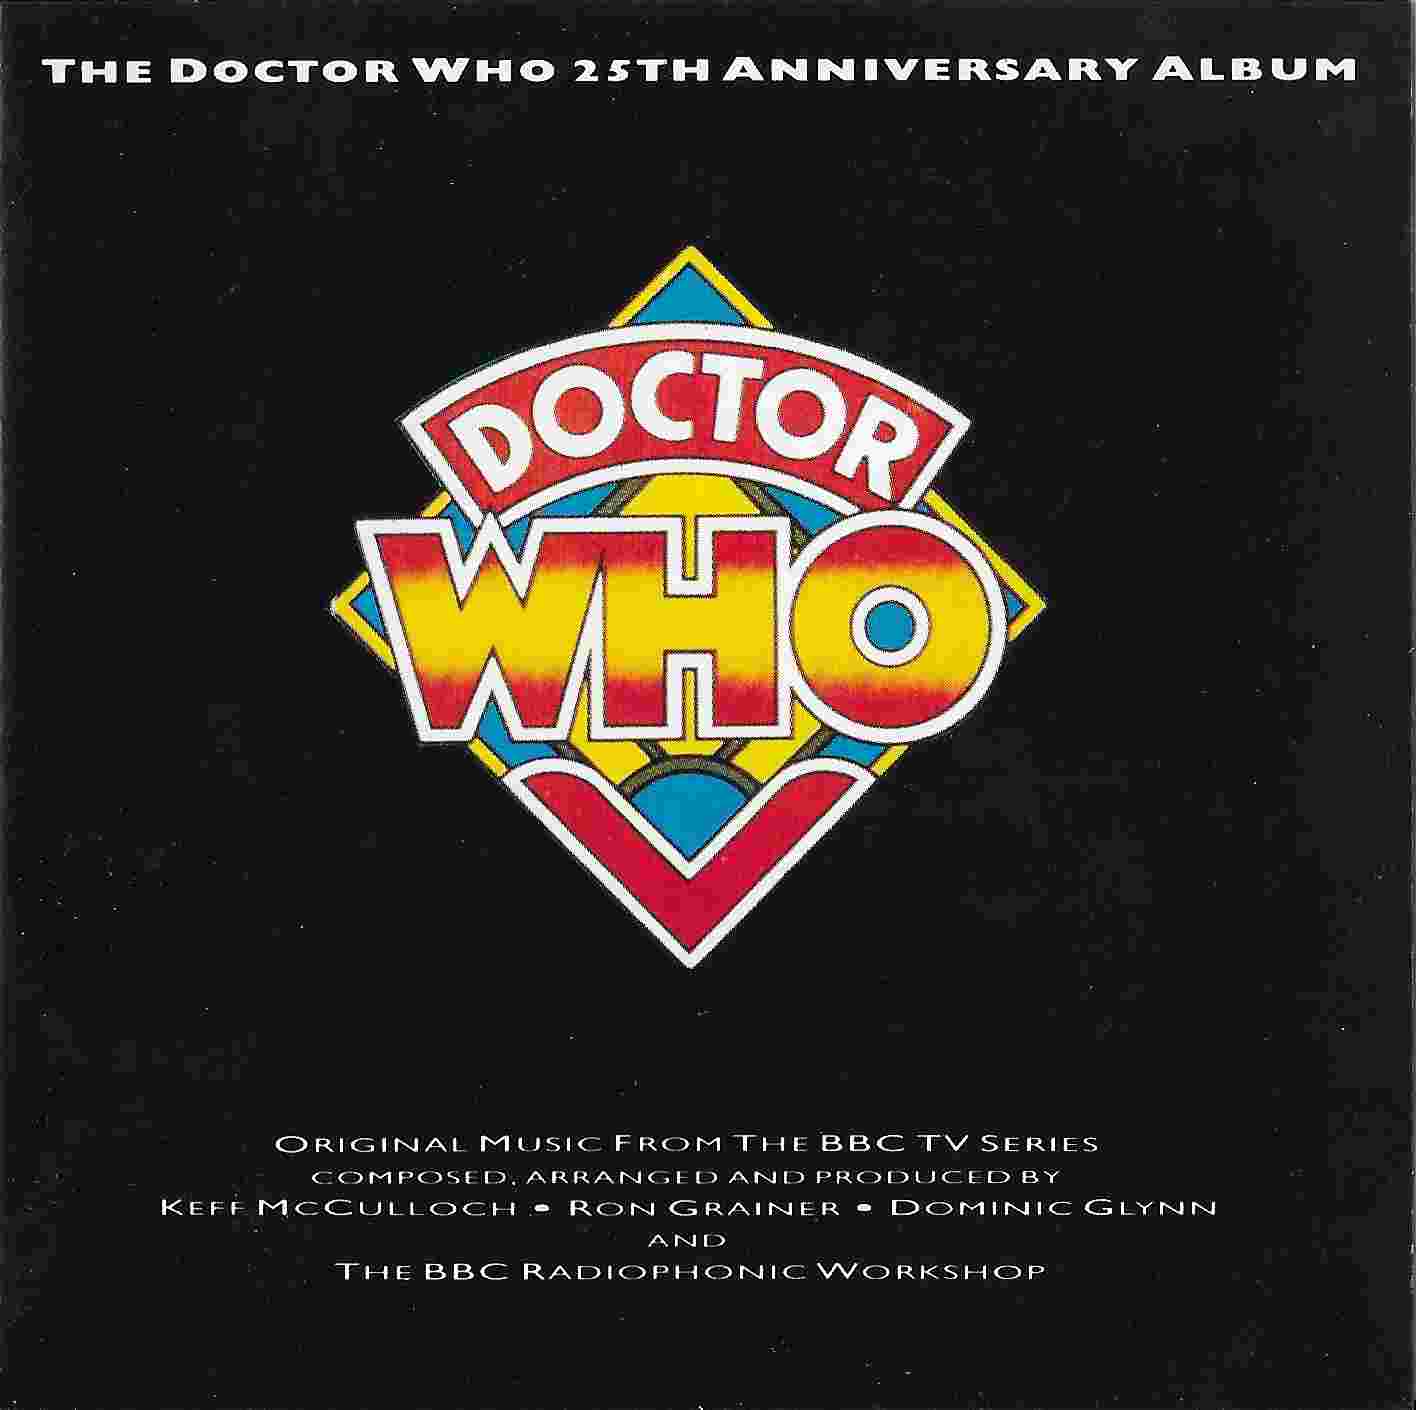 Picture of BBCCD707 Doctor Who - 25th anniversary album by artist Various from the BBC cds - Records and Tapes library